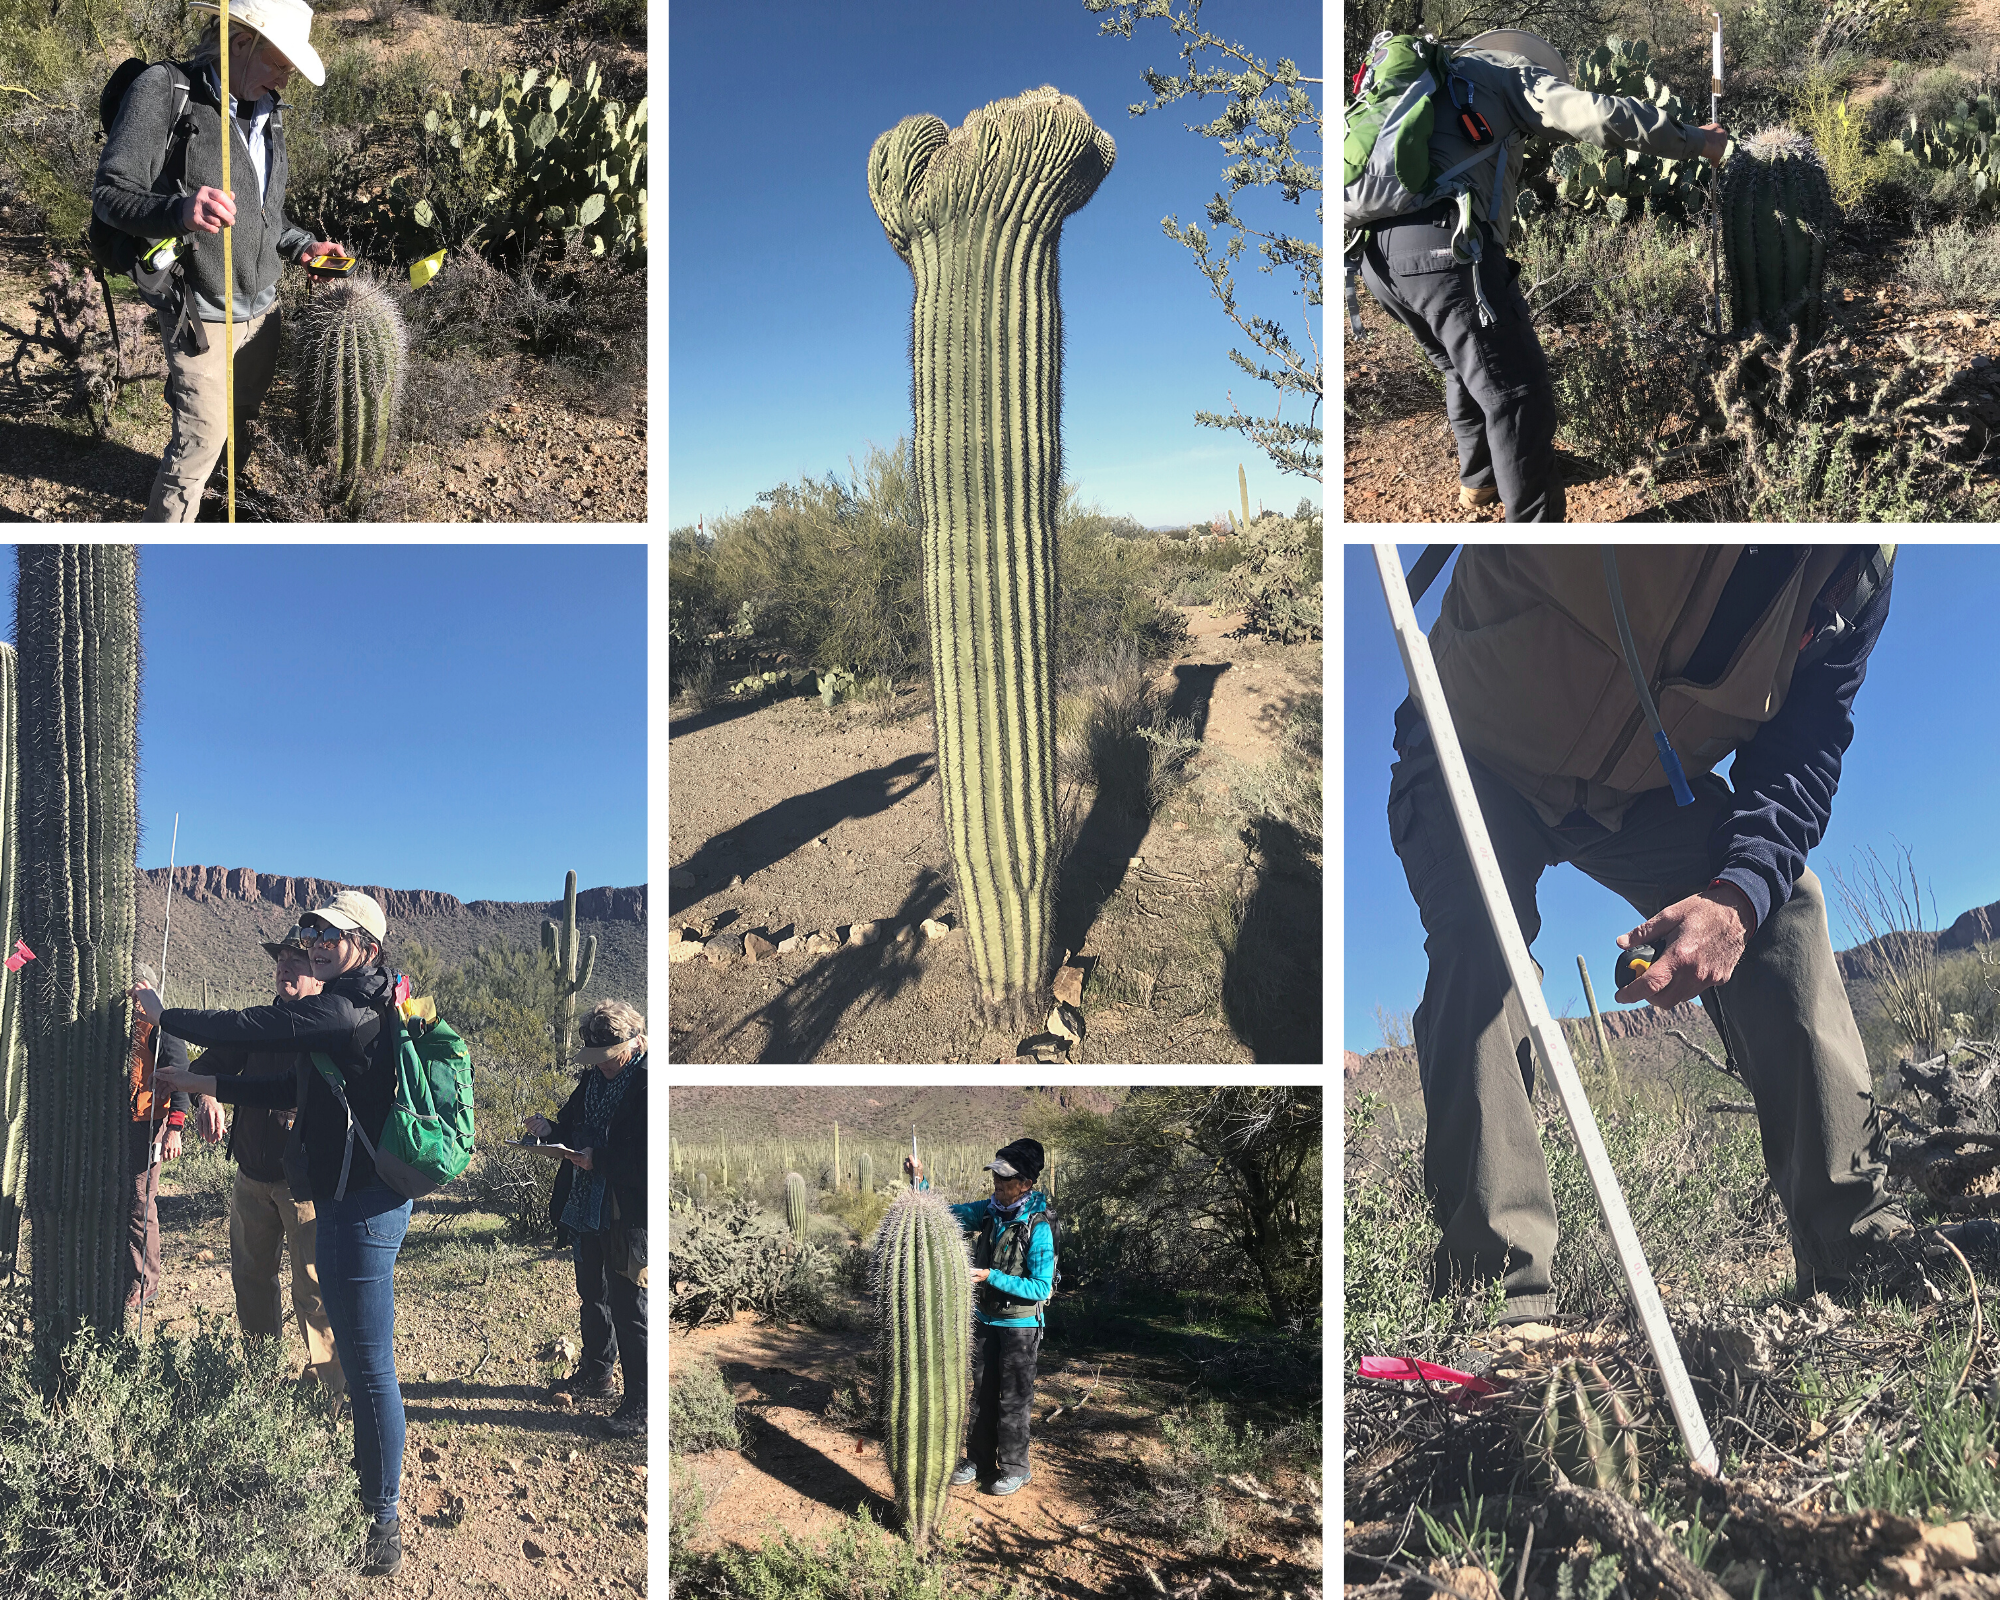 A photo collage of volunteers out on the field and of a crested saguaro. Some of the volunteers are measuring saguaros while others are finding the coordinates.